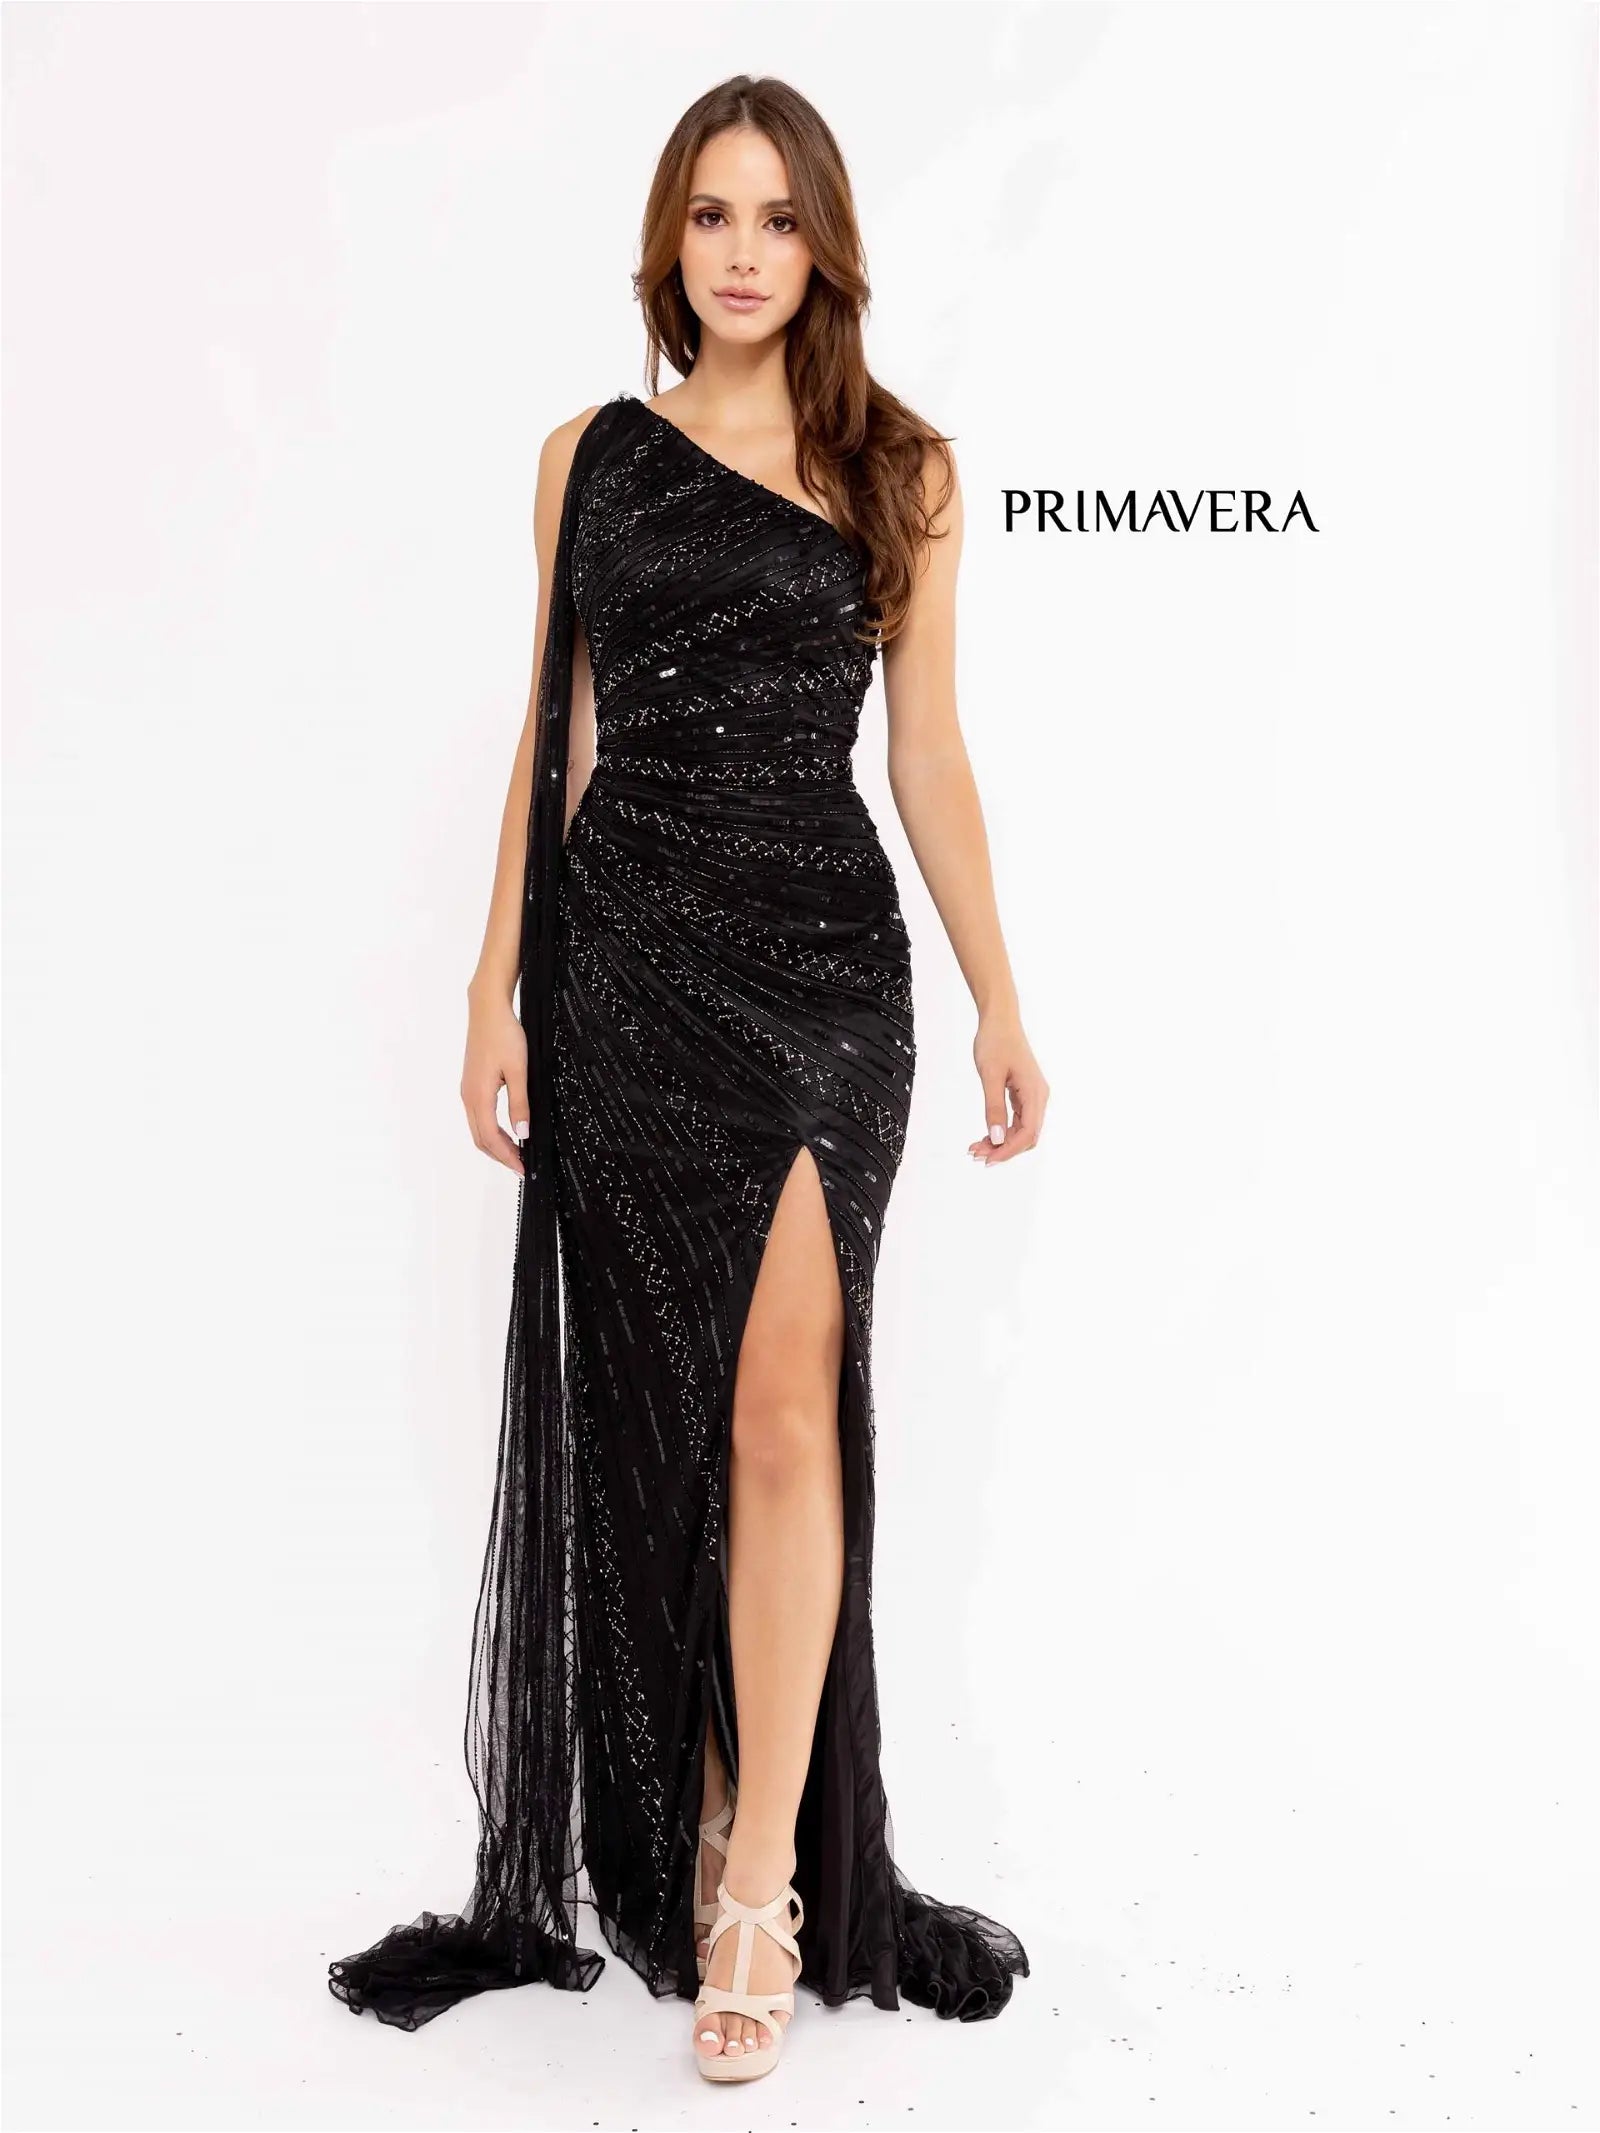 Primavera Couture 3956 Long Fitted Beaded One Shoulder Cape Prom Dress Slit Pageant Gown  Sizes: 000-24  Colors: Lilac, Black